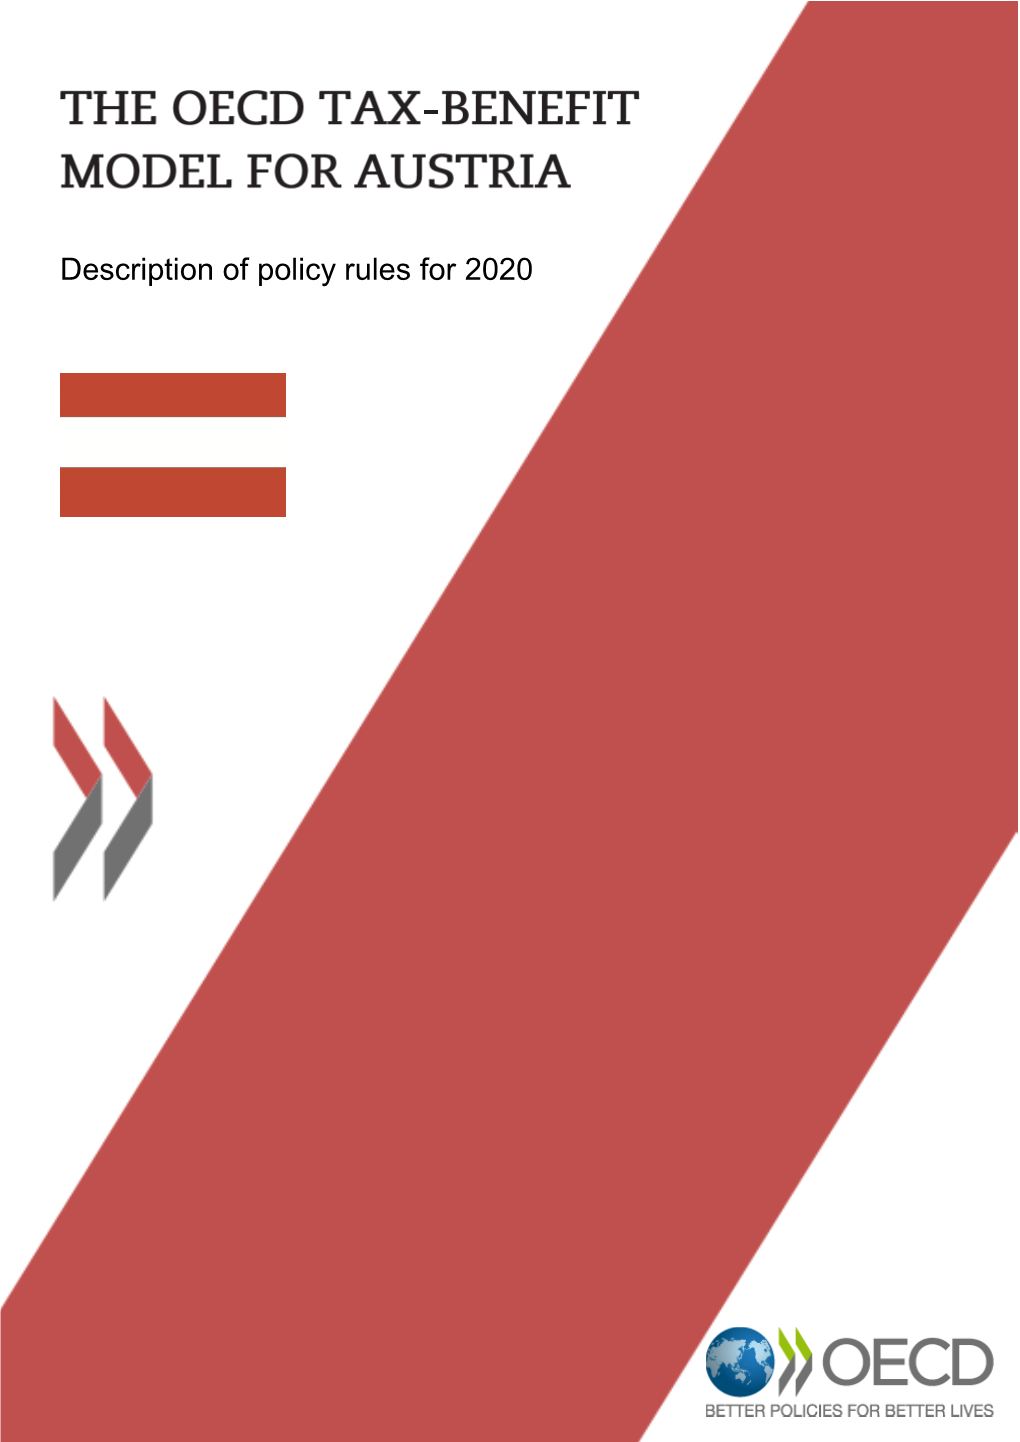 AUSTRIA Description of Policy Rules for 2020